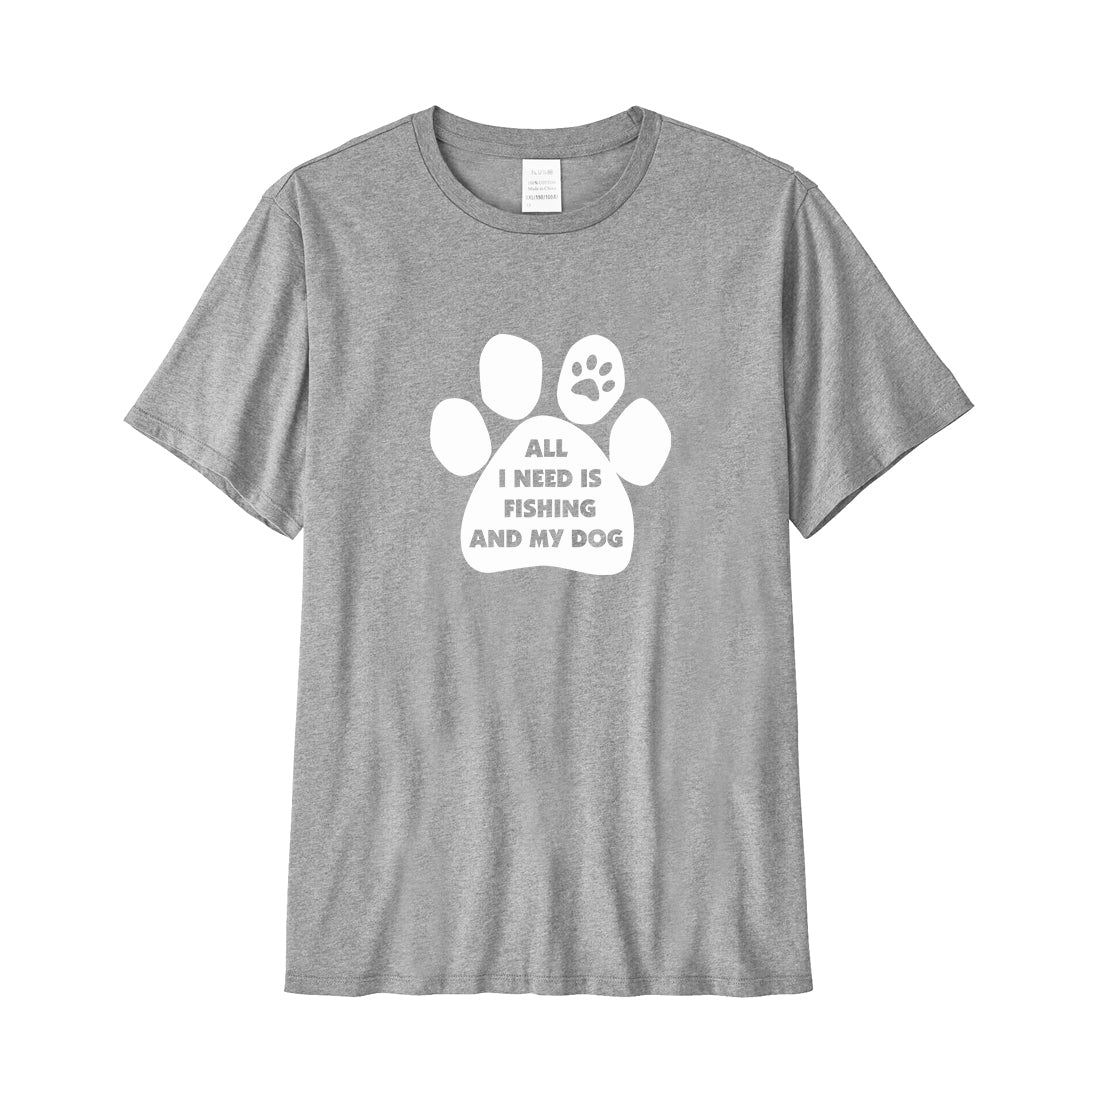 ALL I NEED IS FISHING AND MY DOG Performance T-Shirt